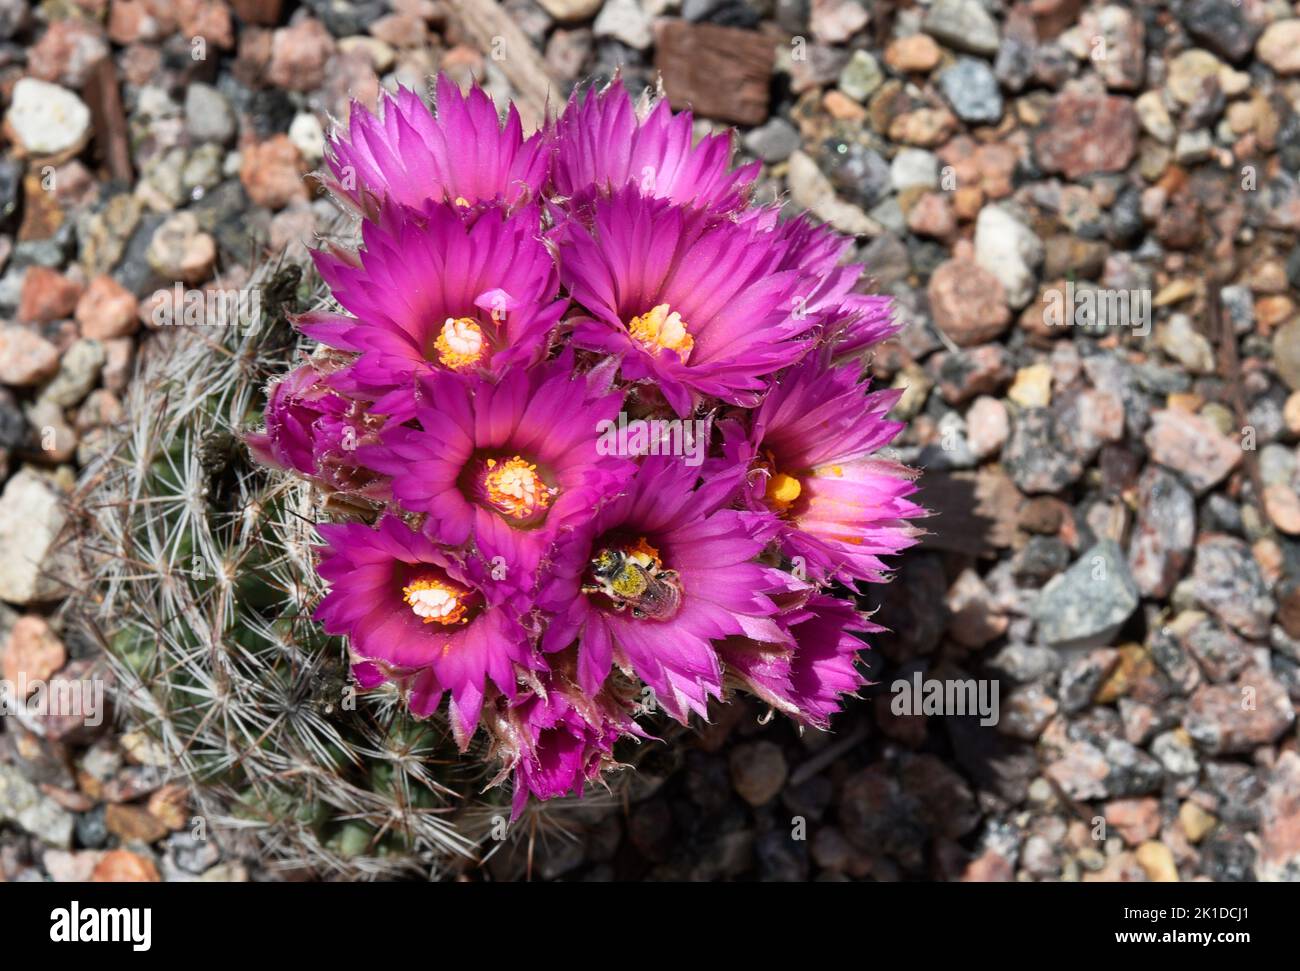 A bee visits a blooming pincushion cactus (Escobaria vivipapa), also known as a beehive cactus, in the American Southwest near Santa Fe, New Mexico. Stock Photo